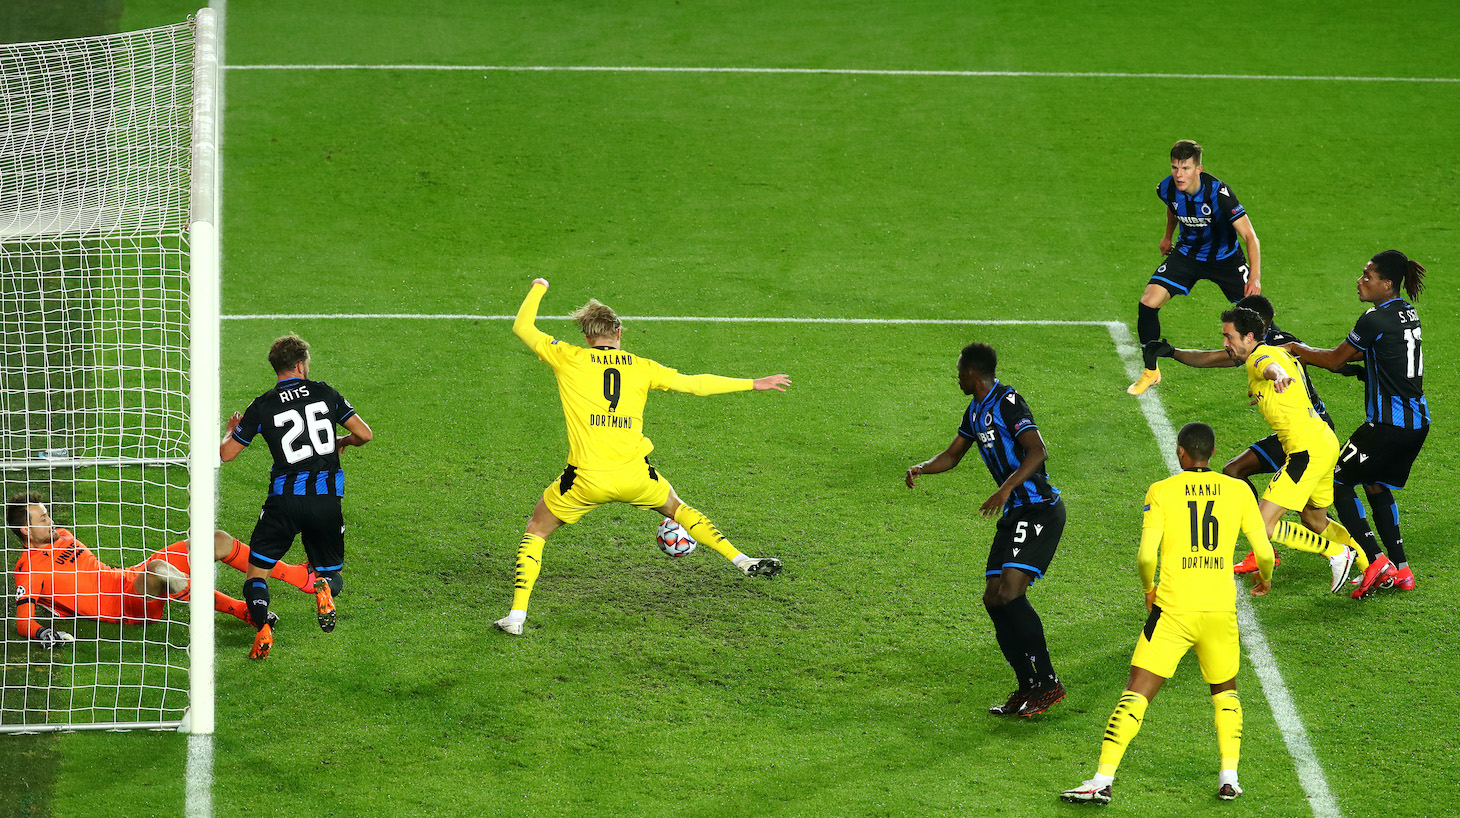 Erling Haaland of Borussia Dortmund scoring his teams second goal of the game during the UEFA Champions League Group F stage match between Club Brugge KV and Borussia Dortmund at Jan Breydel Stadium on November 04, 2020 in Brugge, Belgium.